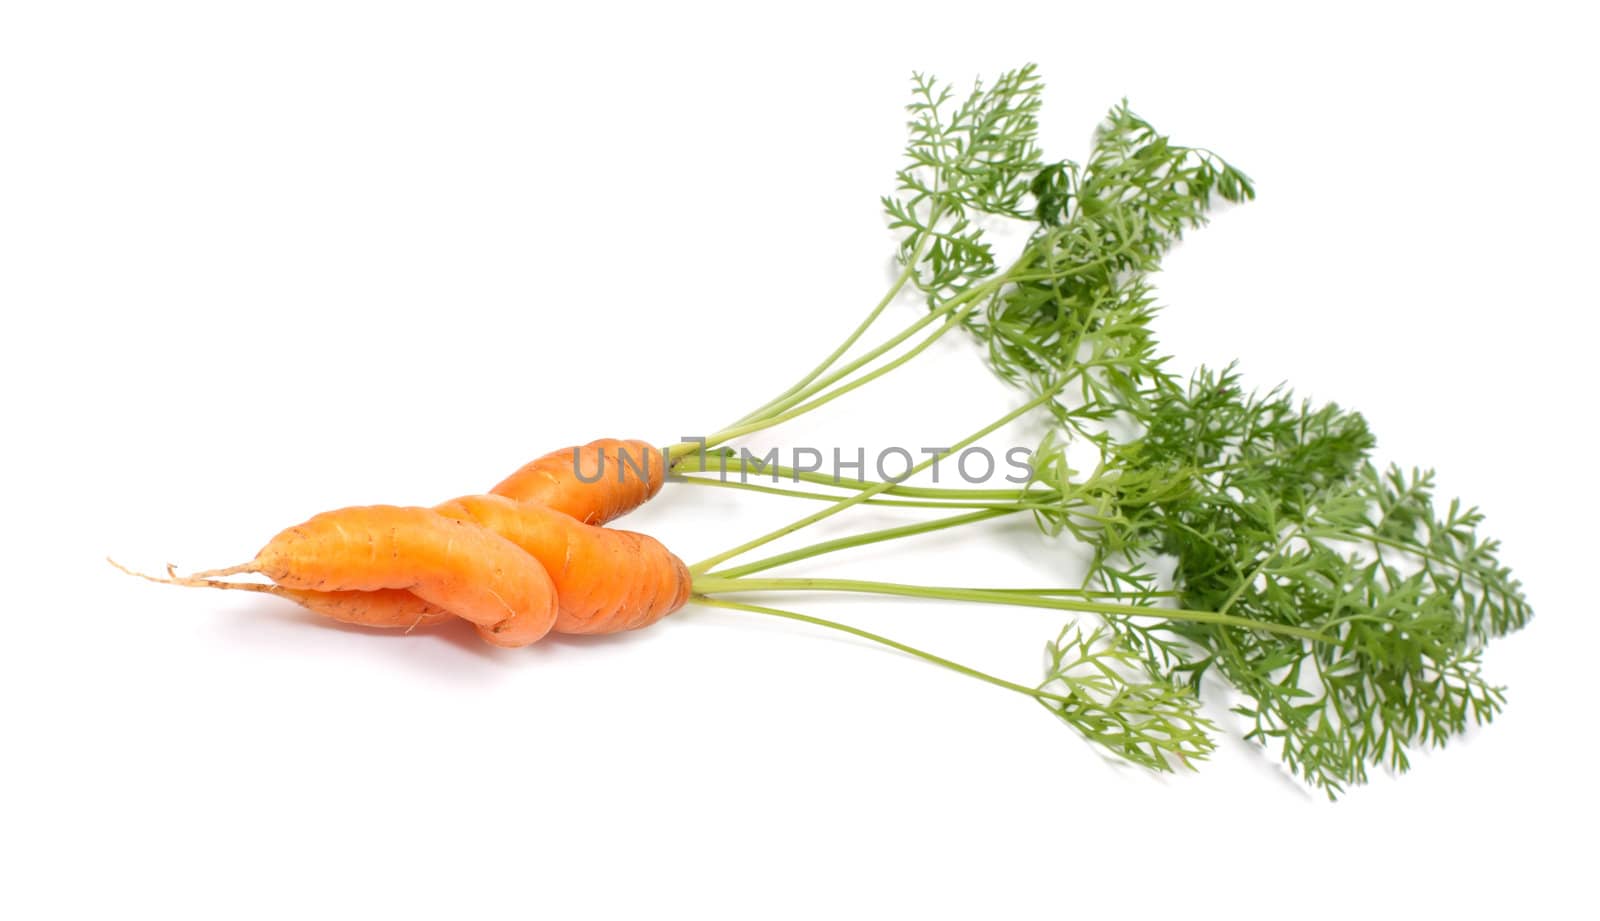 Two carrots with tops on white background.